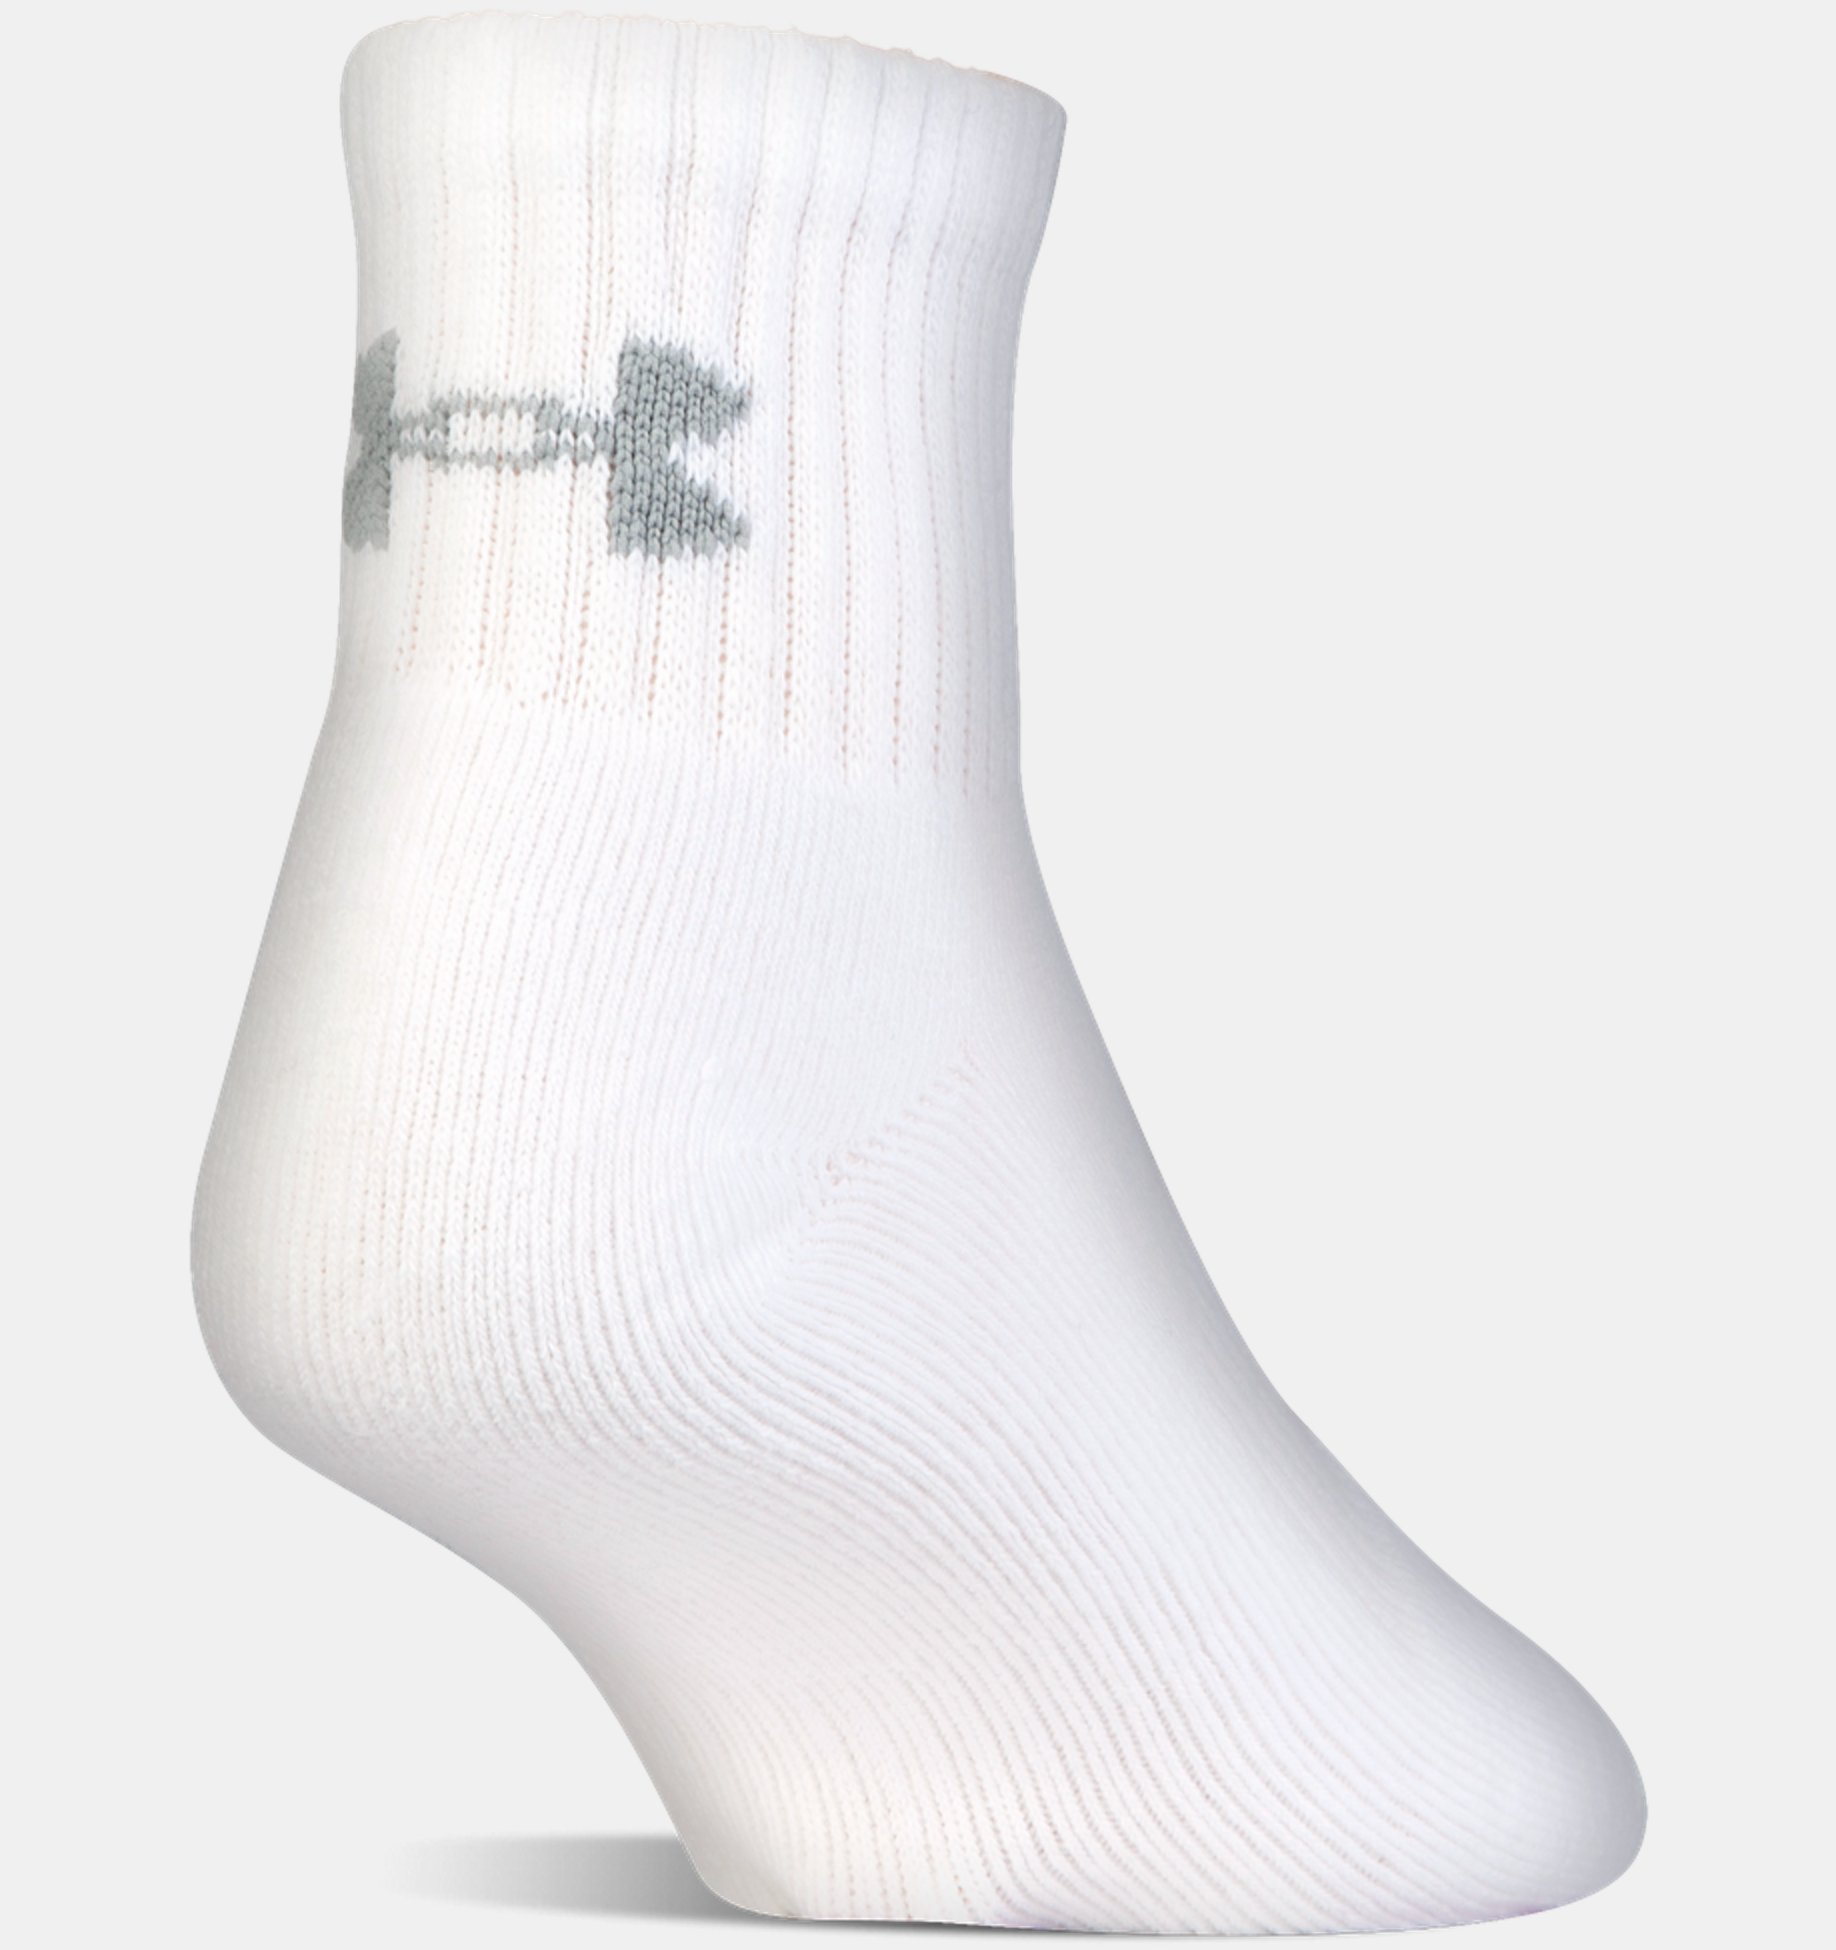 Under Armour Charged Cotton 2.0 Crew Sports Socks